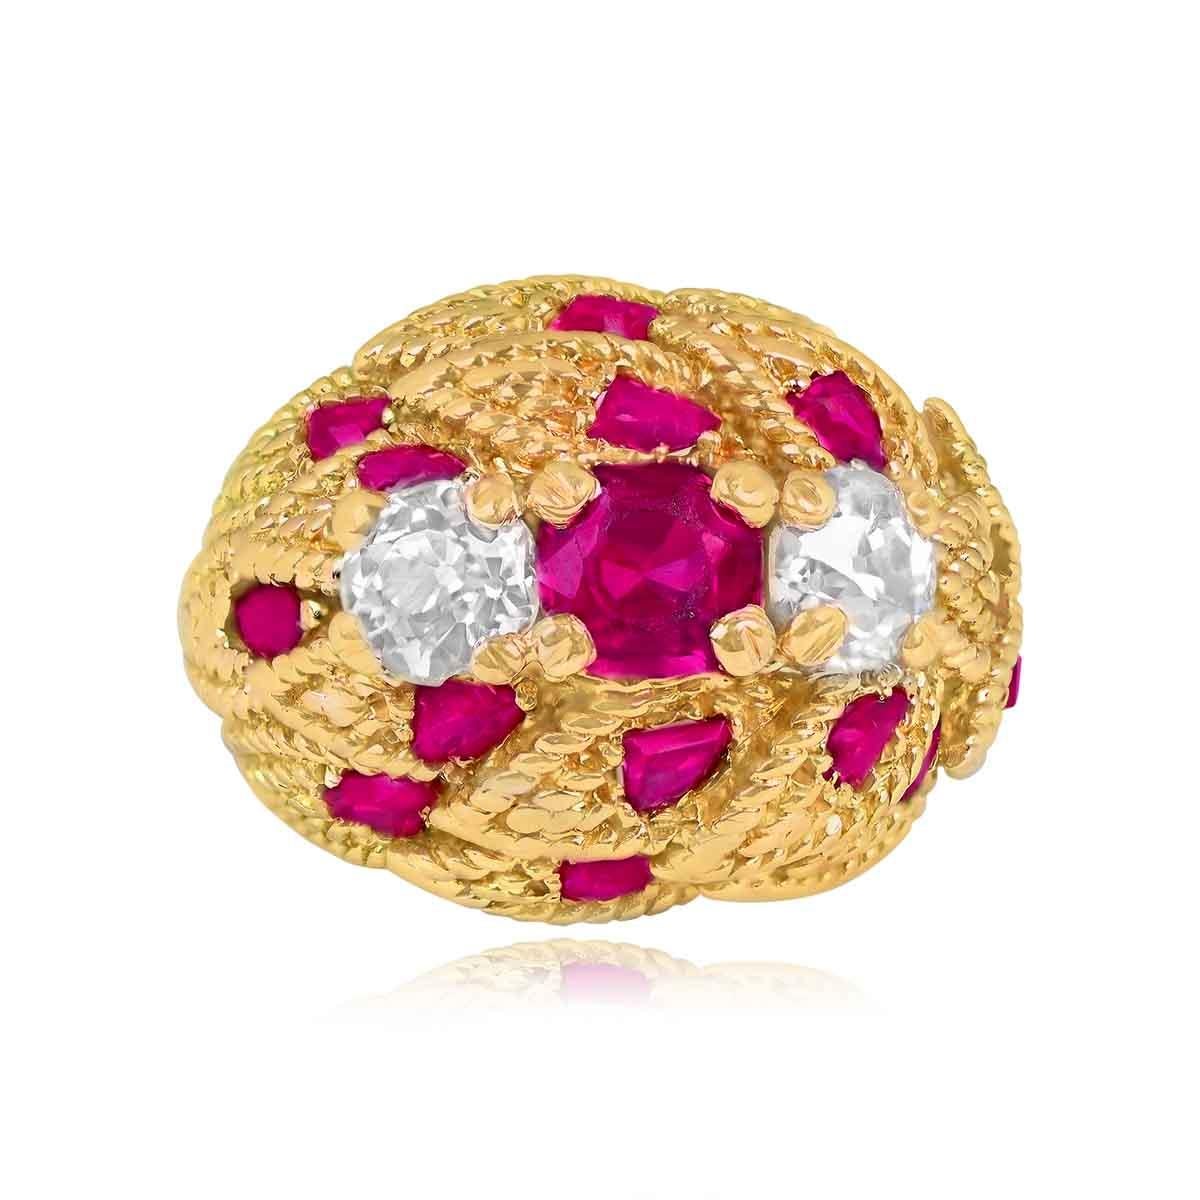 A stunning vintage engagement ring showcasing a natural cushion-cut ruby weighing approximately 1 carat, radiating warmth and elegance. Flanking the center stone are two old European cut diamonds, with a total approximate diamond weight of 0.75